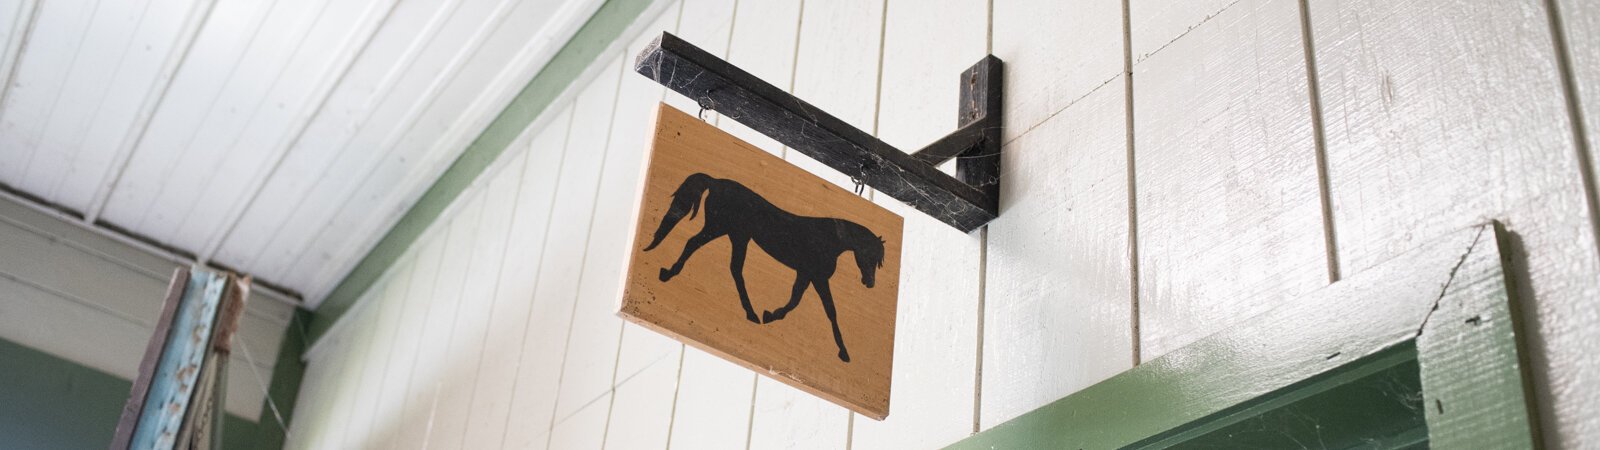 The Summit Equestrian Center at 10808 La Cabreah Ln. is expanding equestrian culture and equine therapy in Fort Wayne.